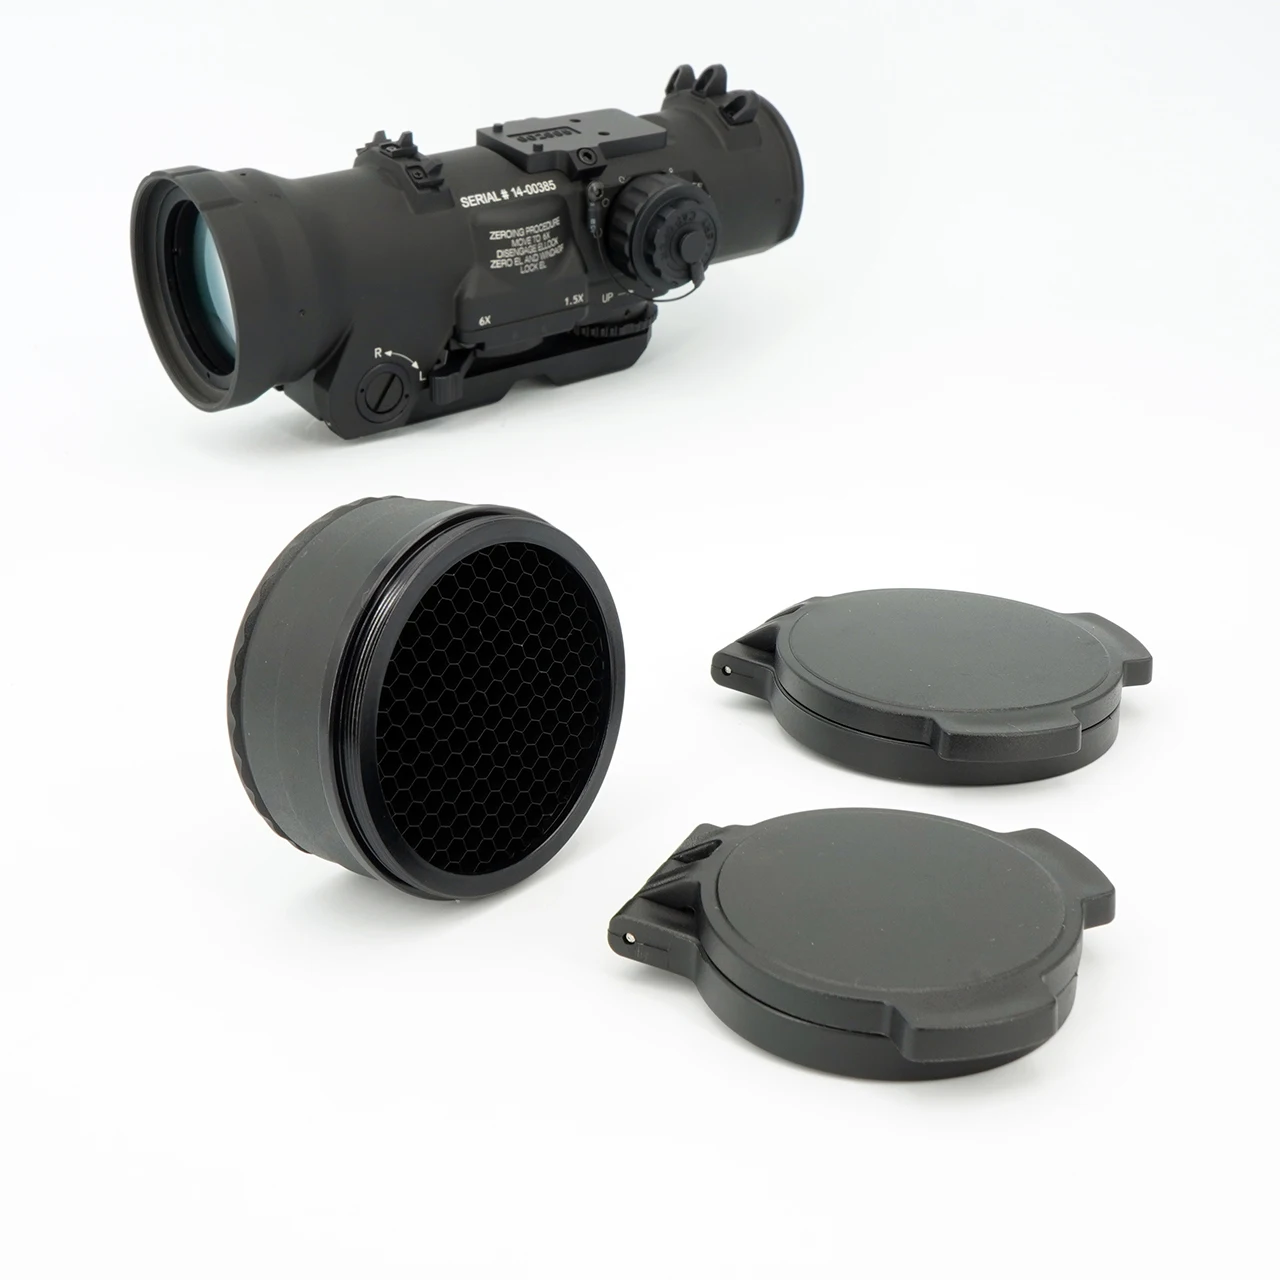 Anti-Reflection Device Killflash With Lens Flip Cover Set For DR 1.5-6x Kill flash Riflescope Dual Role Optical